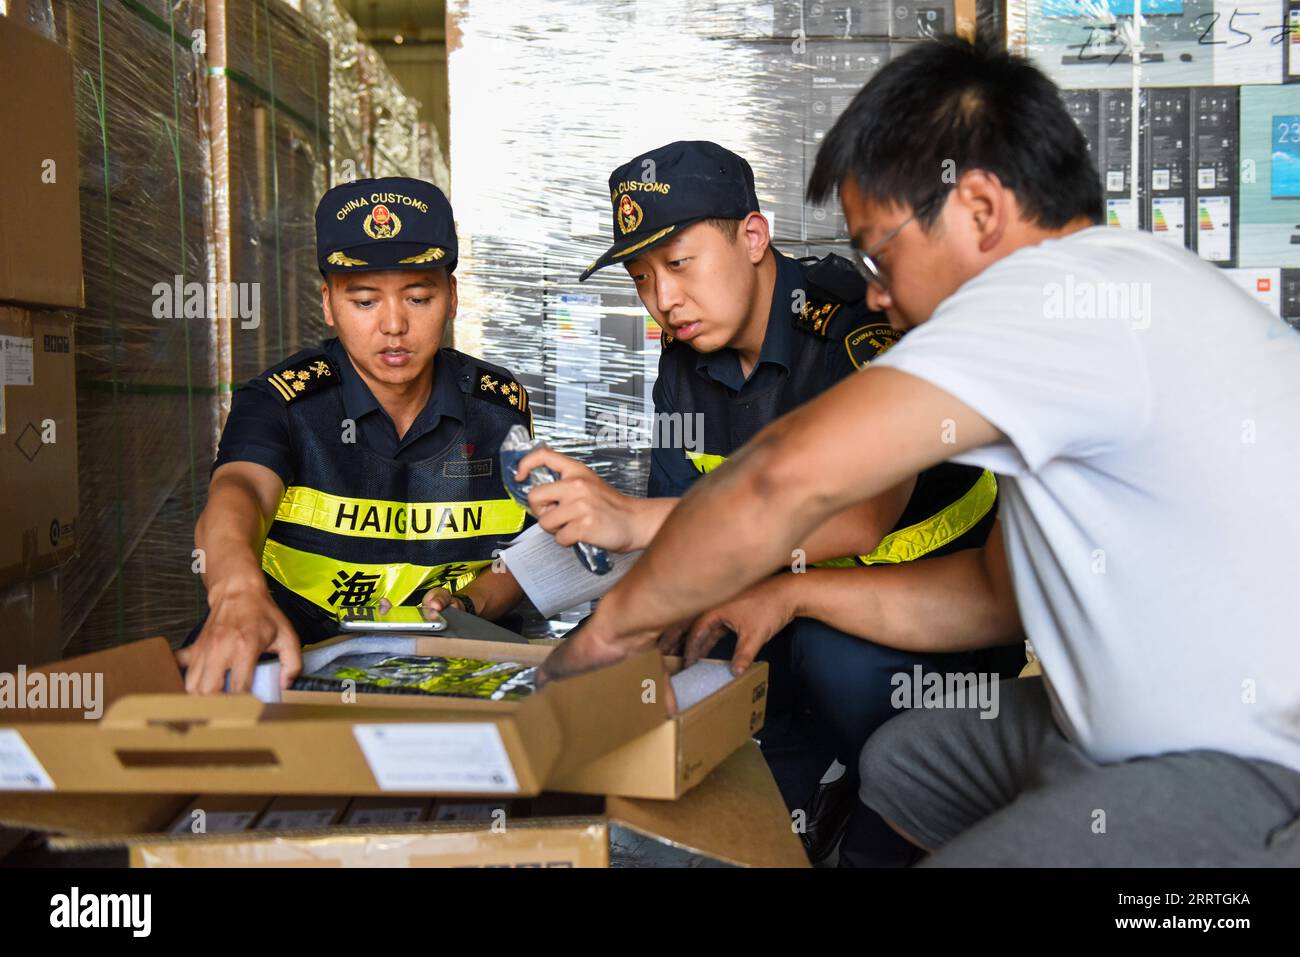 230725 -- ALATAW PASS, July 25, 2023 -- Custom staff check on cargo at the custom clearance center for the cross-border e-commerce of the Alataw Pass comprehensive bonded area in northwest China s Xinjiang Uygur Autonomous Region, July 24, 2023. In recent years, various measures have been taken to create a better business environment for cross-border e-commerce enterprises in Alataw Pass. The cross-border e-commerce business was launched in the inland port in northwest China s Xinjiang Uygur Autonomous Region in January 2020. In the first half of this year, more than 14.50 million cross-border Stock Photo